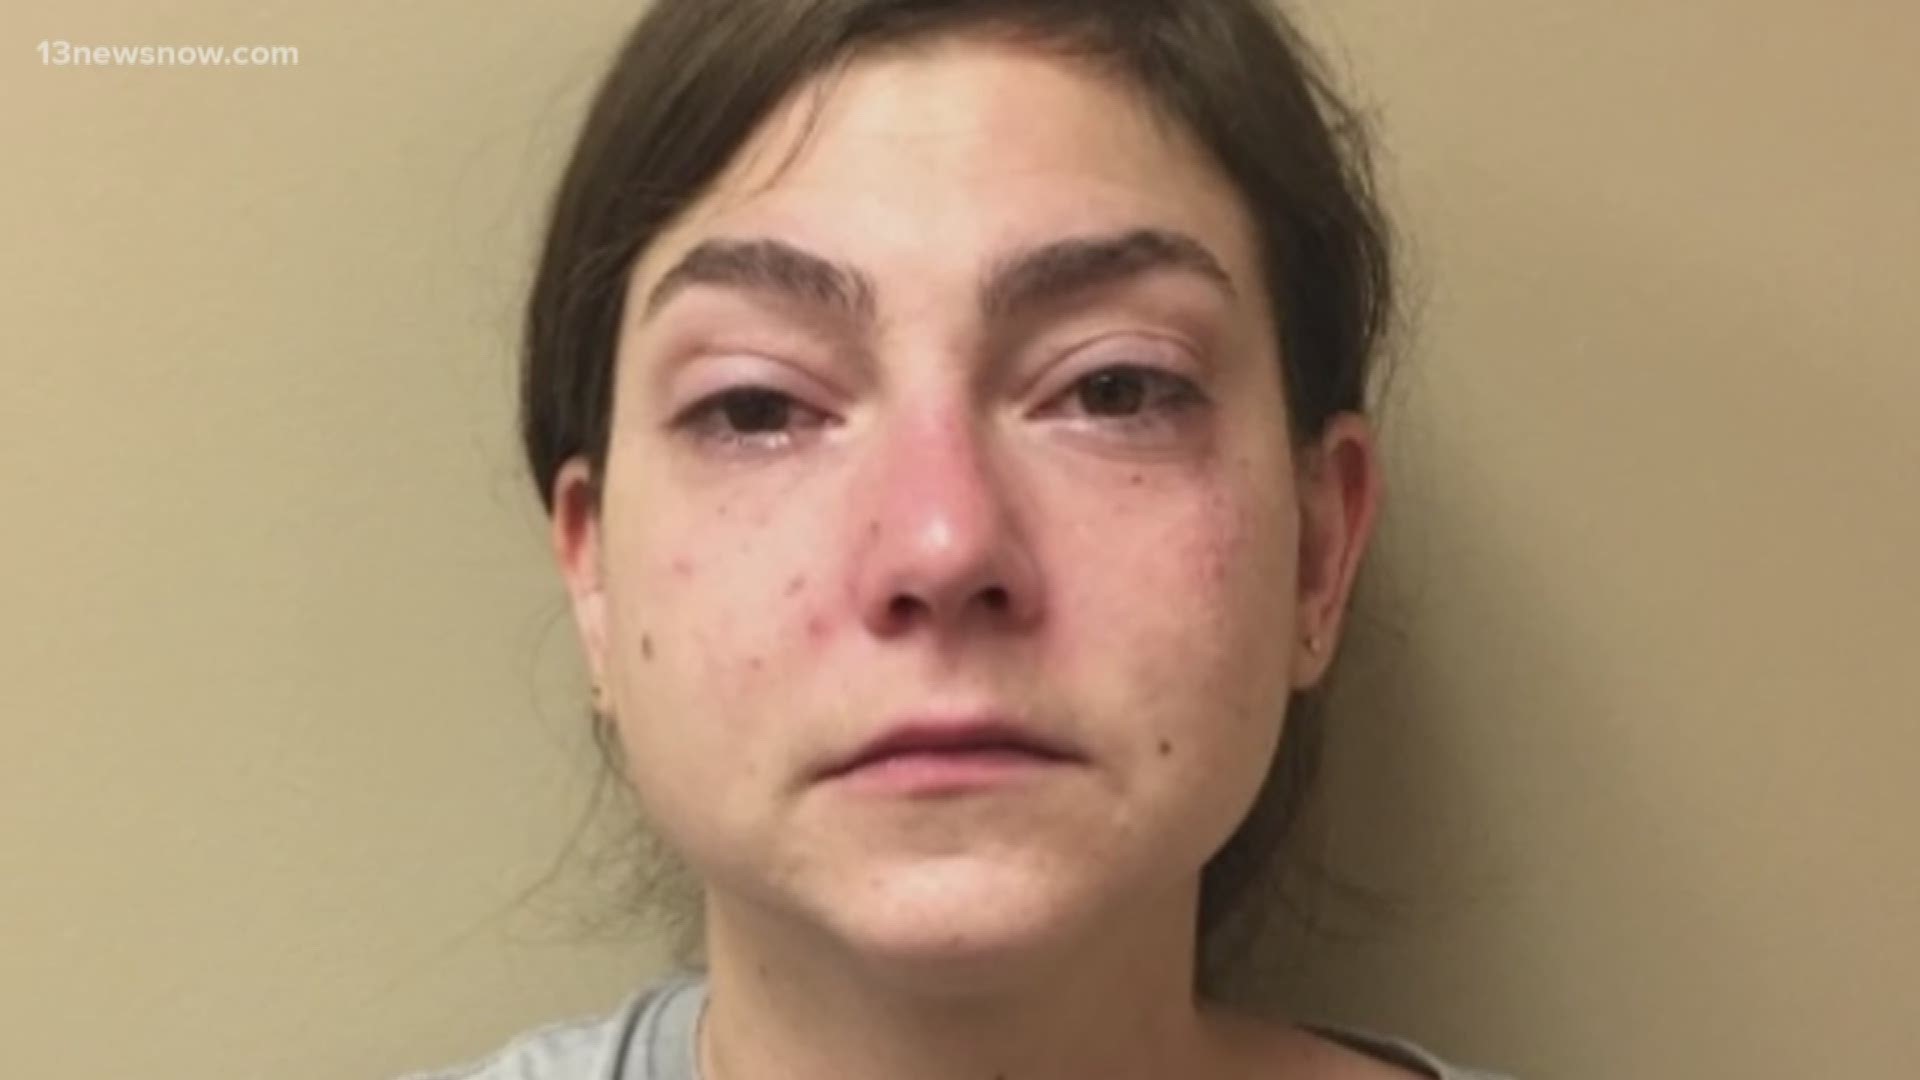 Christa Pohorence, 29, is accused of stabbing her 72-year-old mother to death. Police asked neighbors about the family Tuesday.